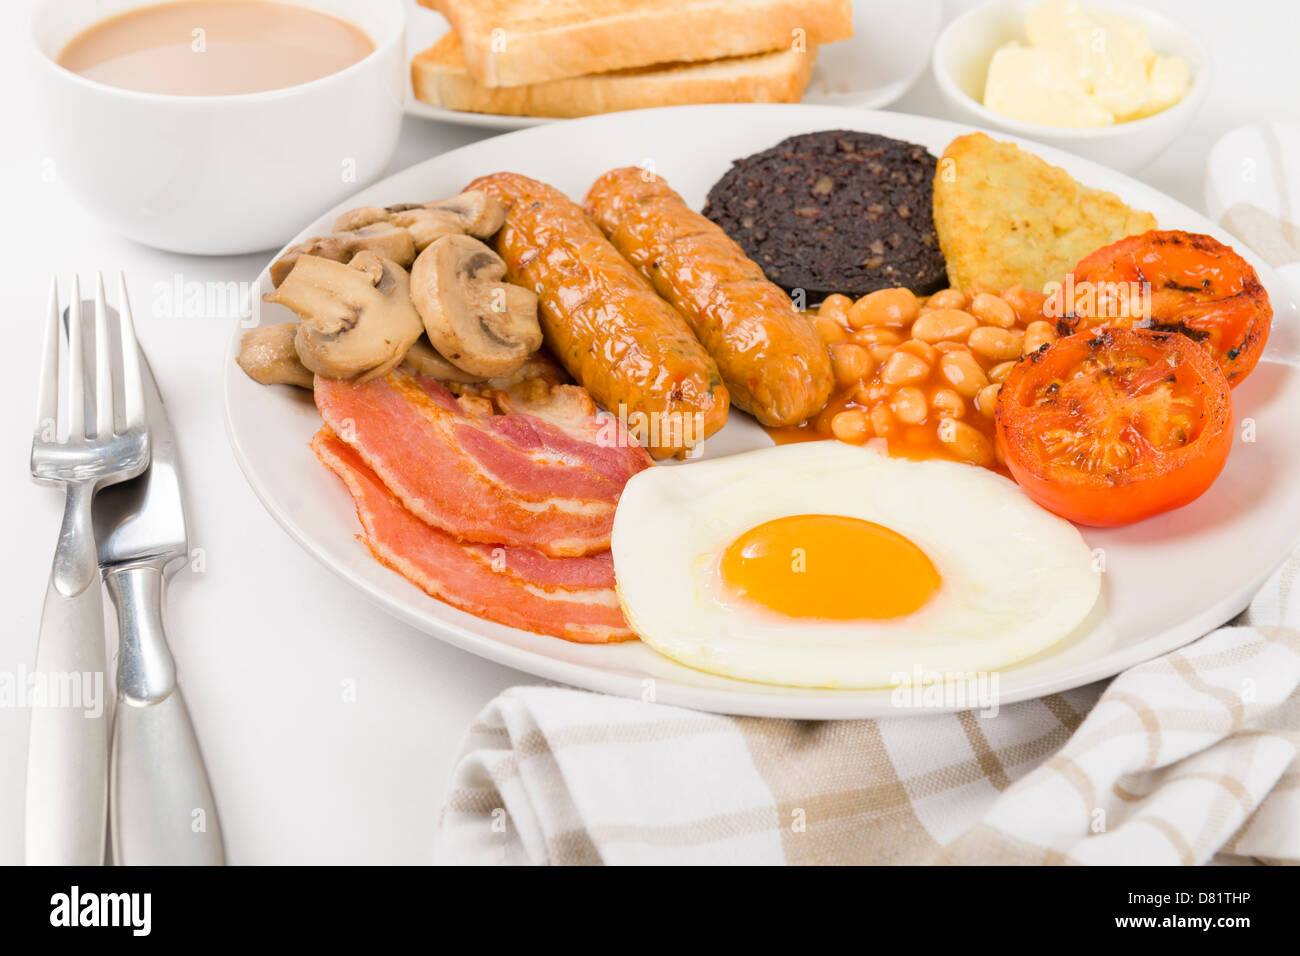 Full English Breakfast -  Fry-up with egg, bacon, mushrooms, tomatoes, sausages, black pudding, hash browns and baked beans. Stock Photo